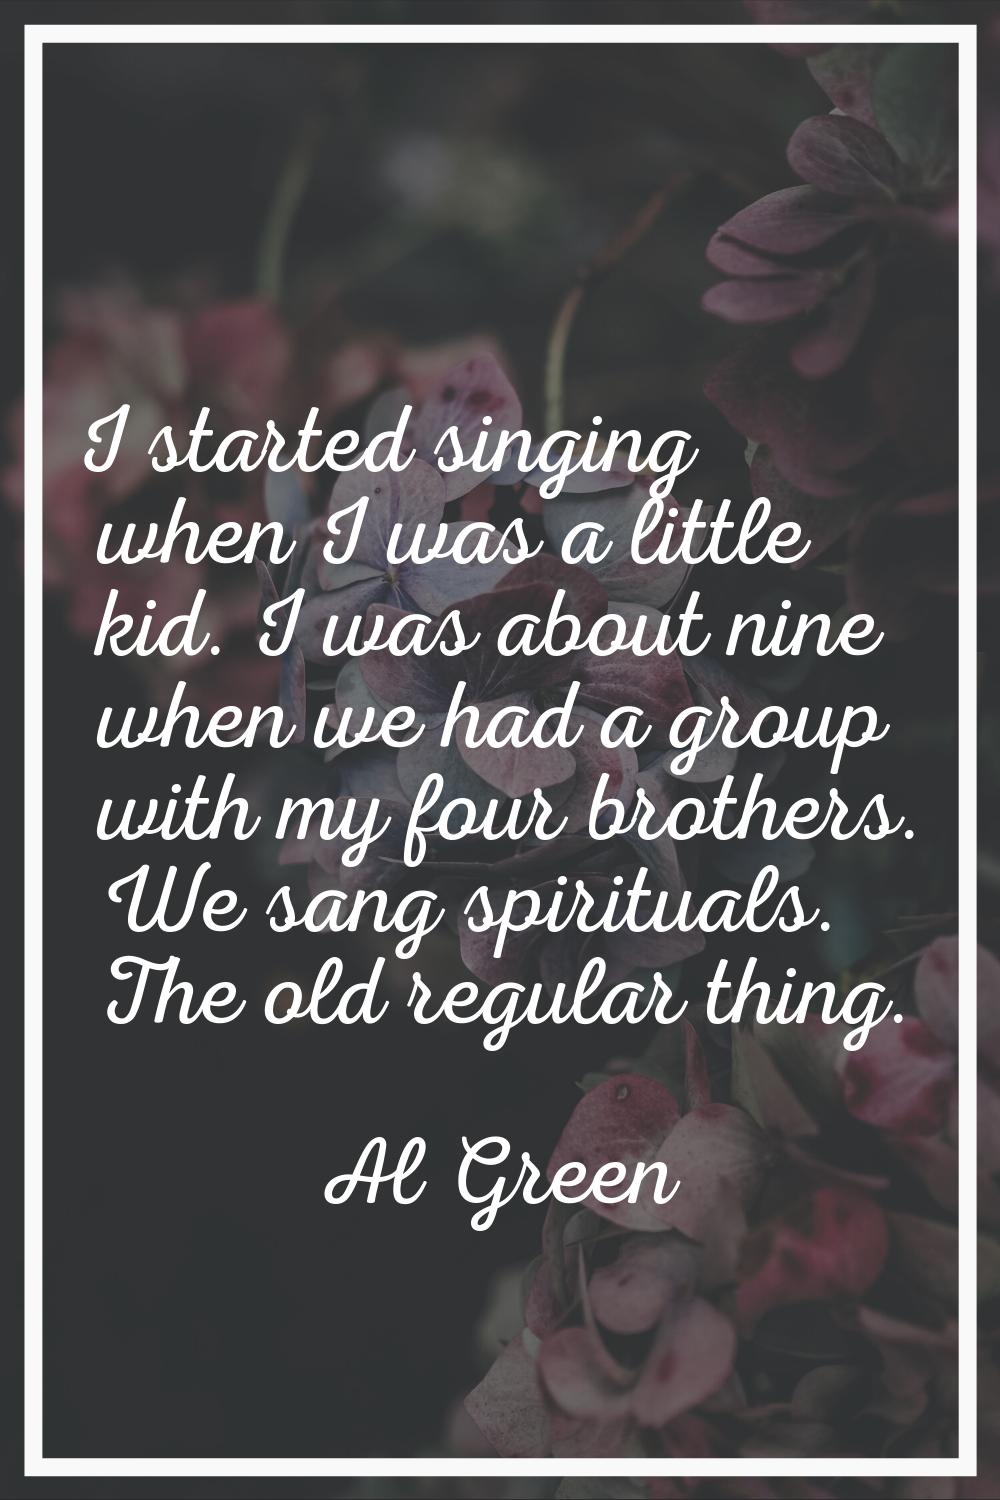 I started singing when I was a little kid. I was about nine when we had a group with my four brothe